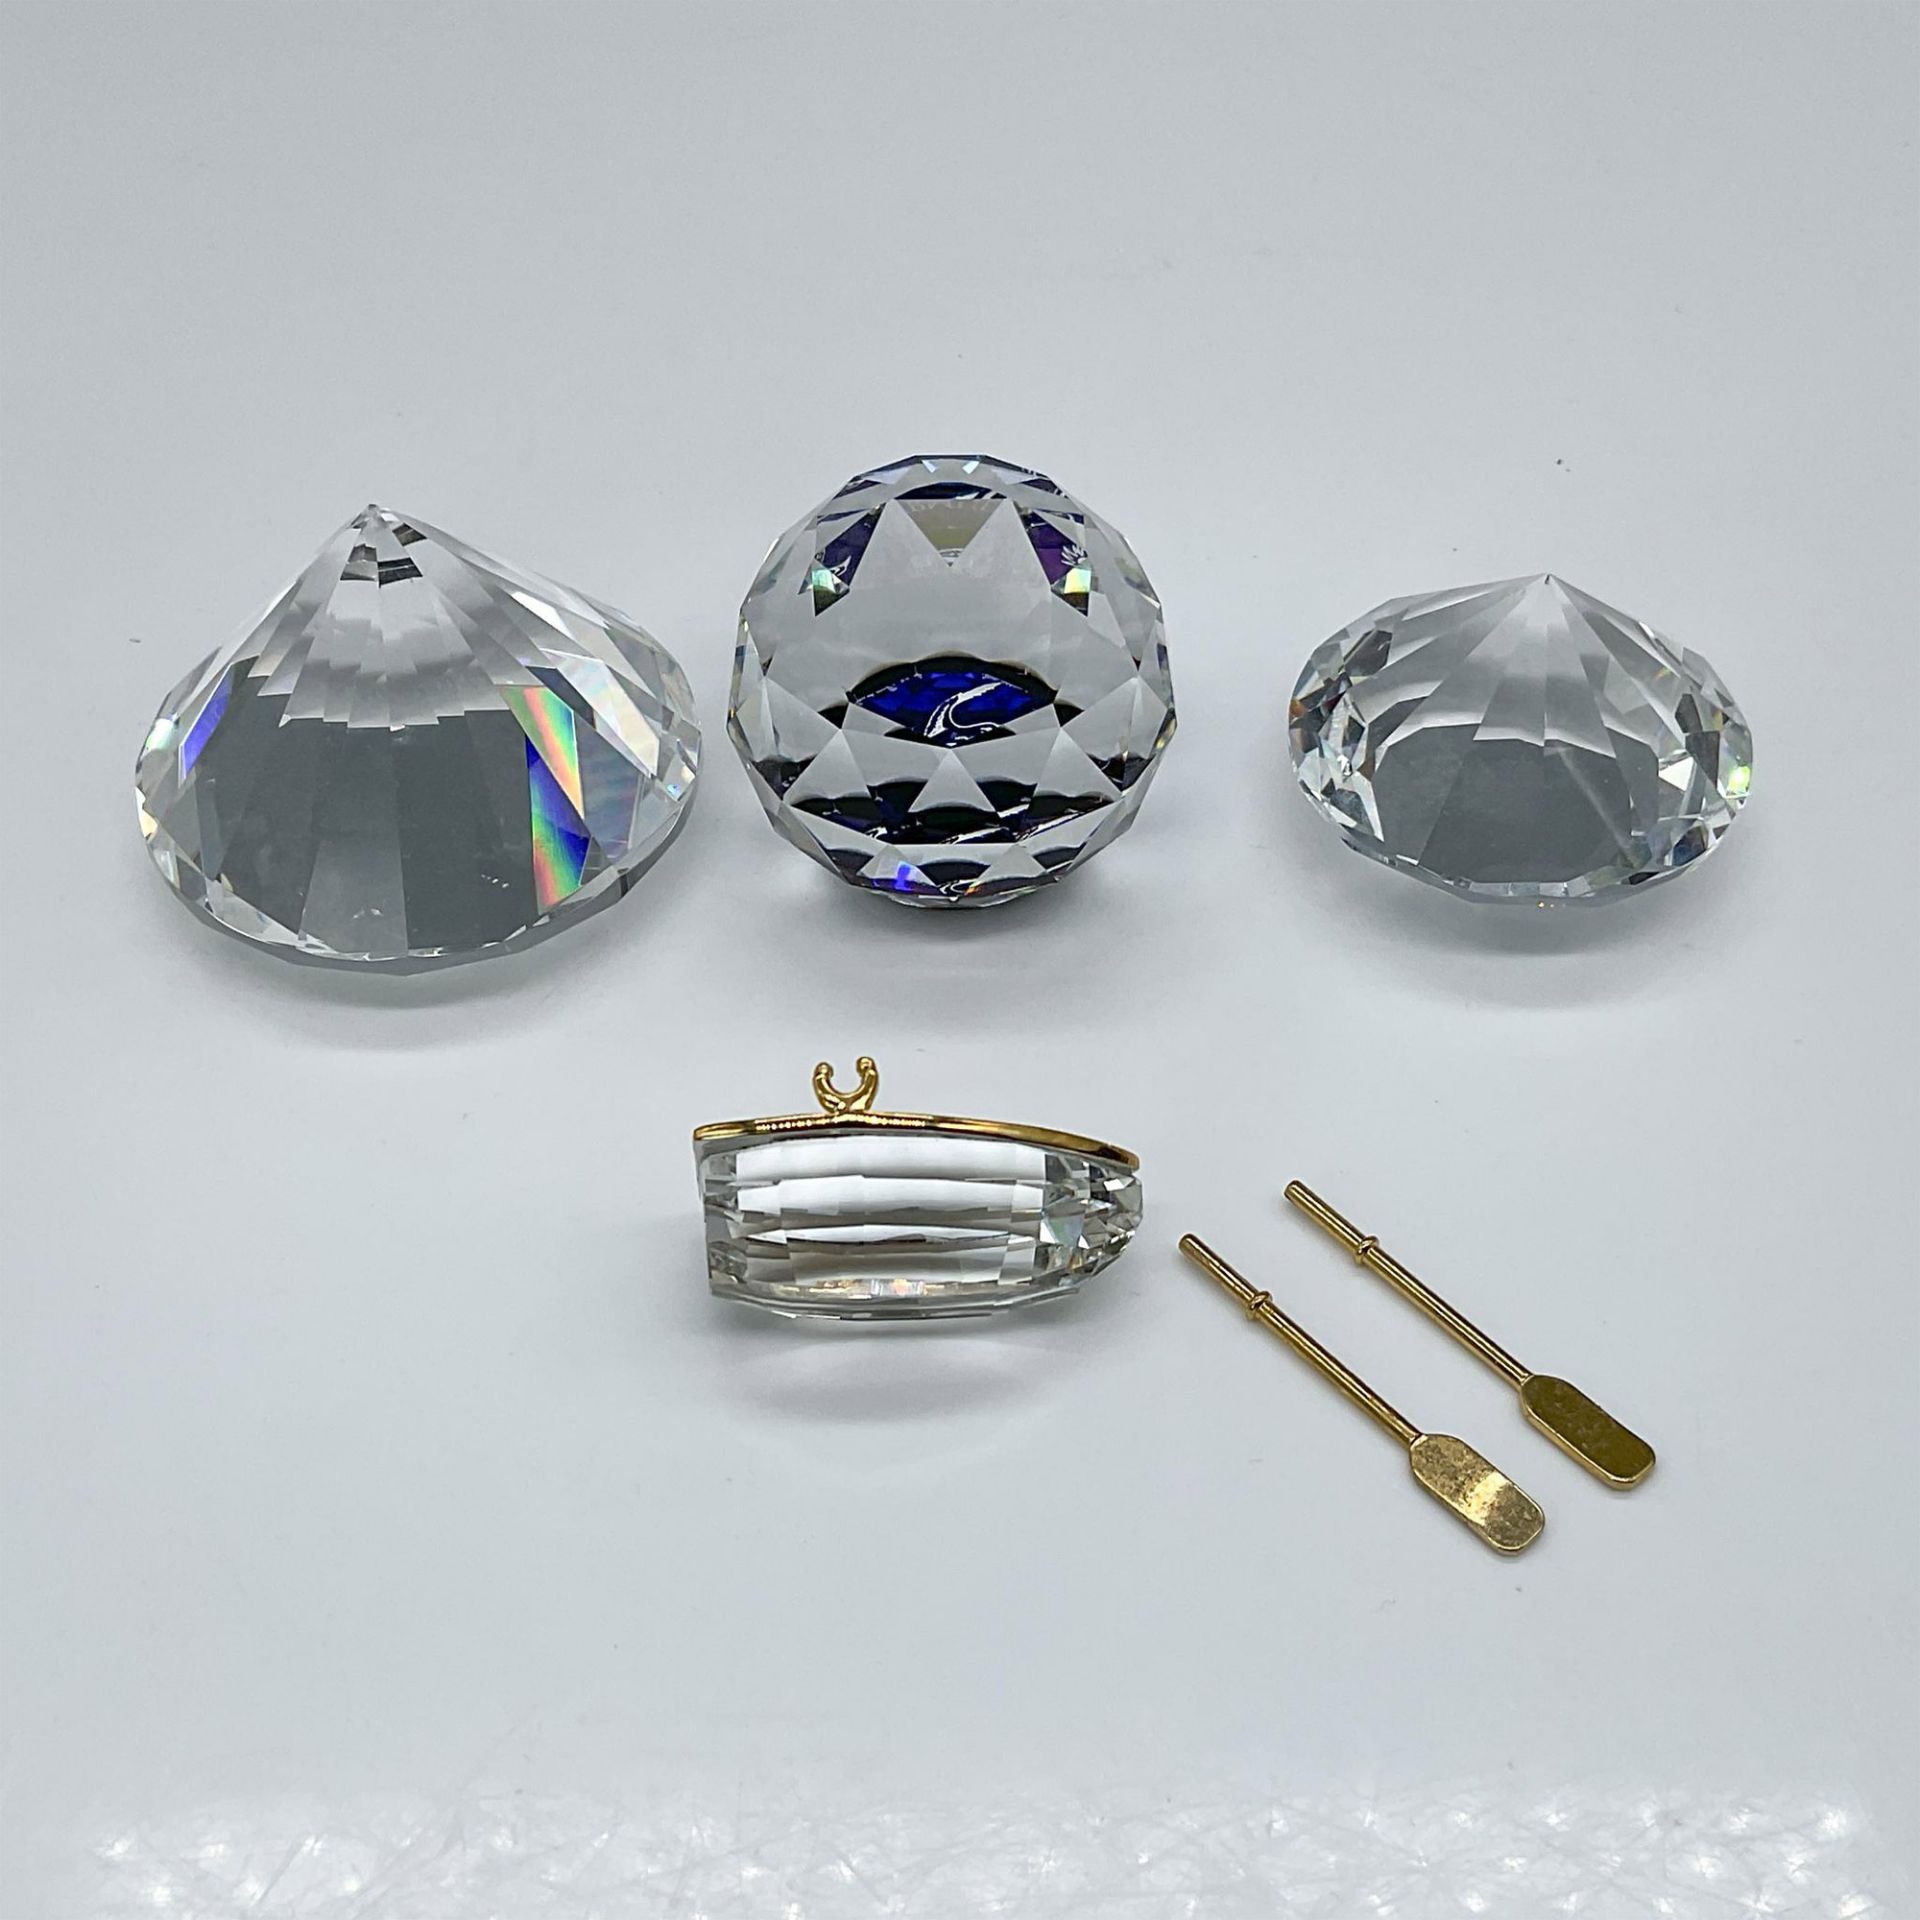 4pc Swarovski Crystal Grouping, Paperweights and Rowboat - Image 3 of 4